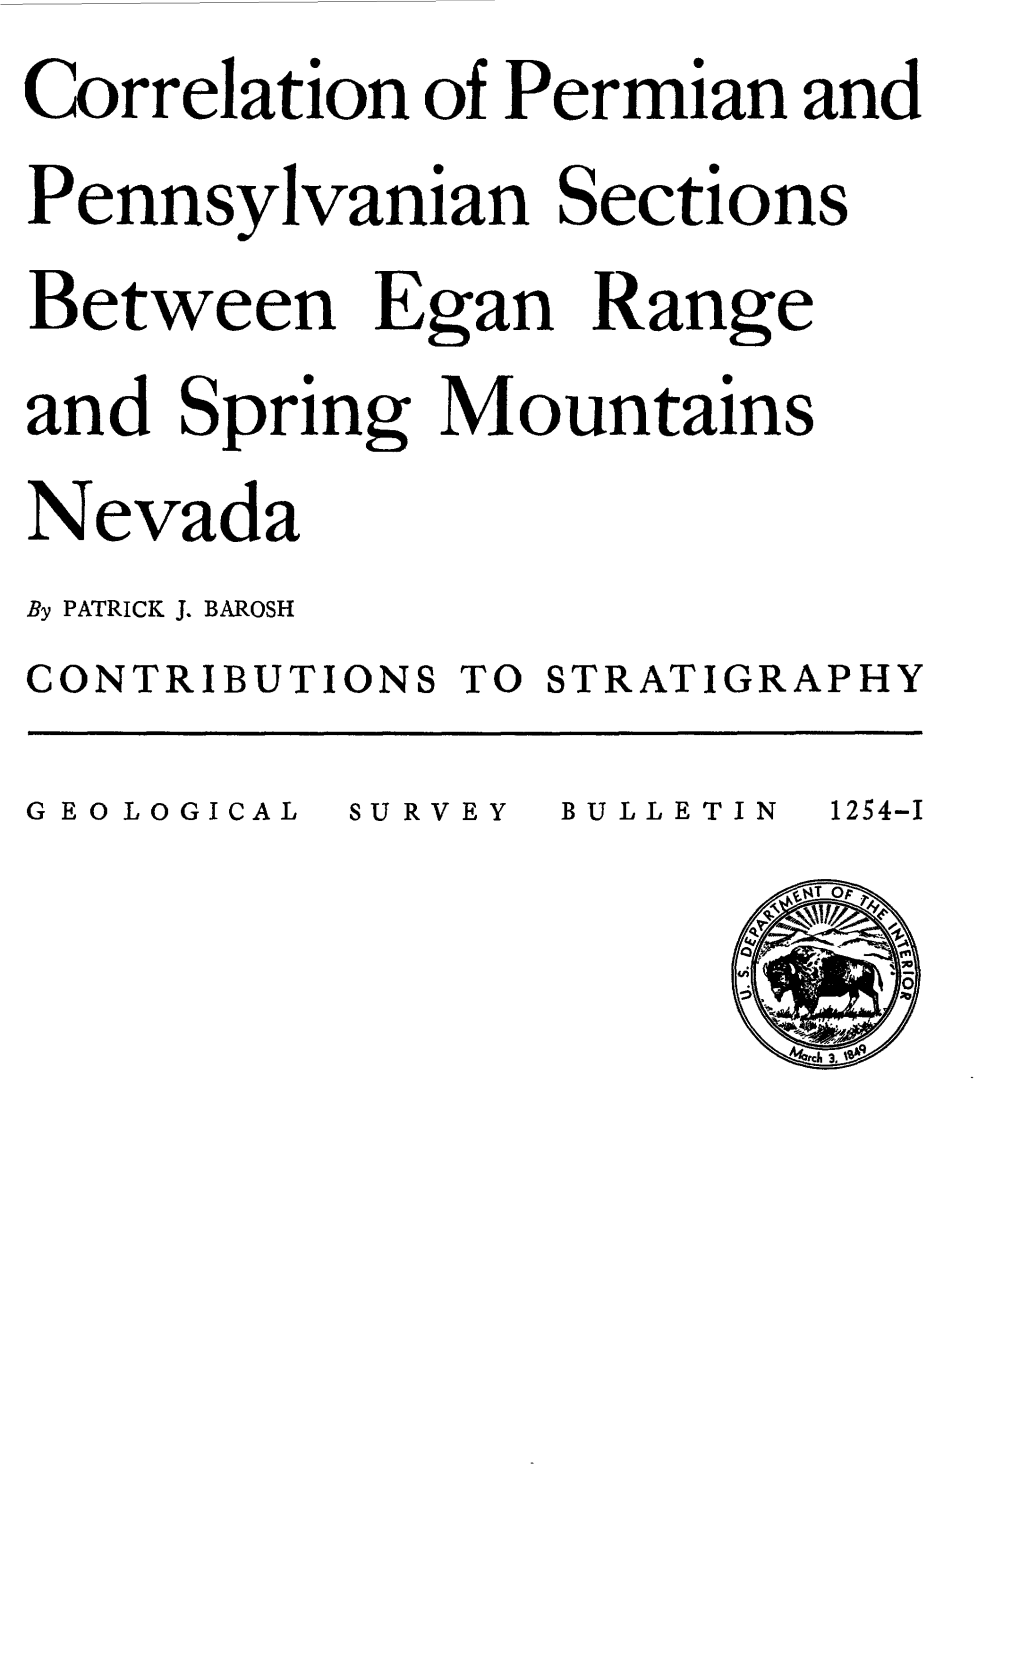 Correlation of Permian and Pennsylvanian Sections Between Egan Range and Spring Mountains Nevada